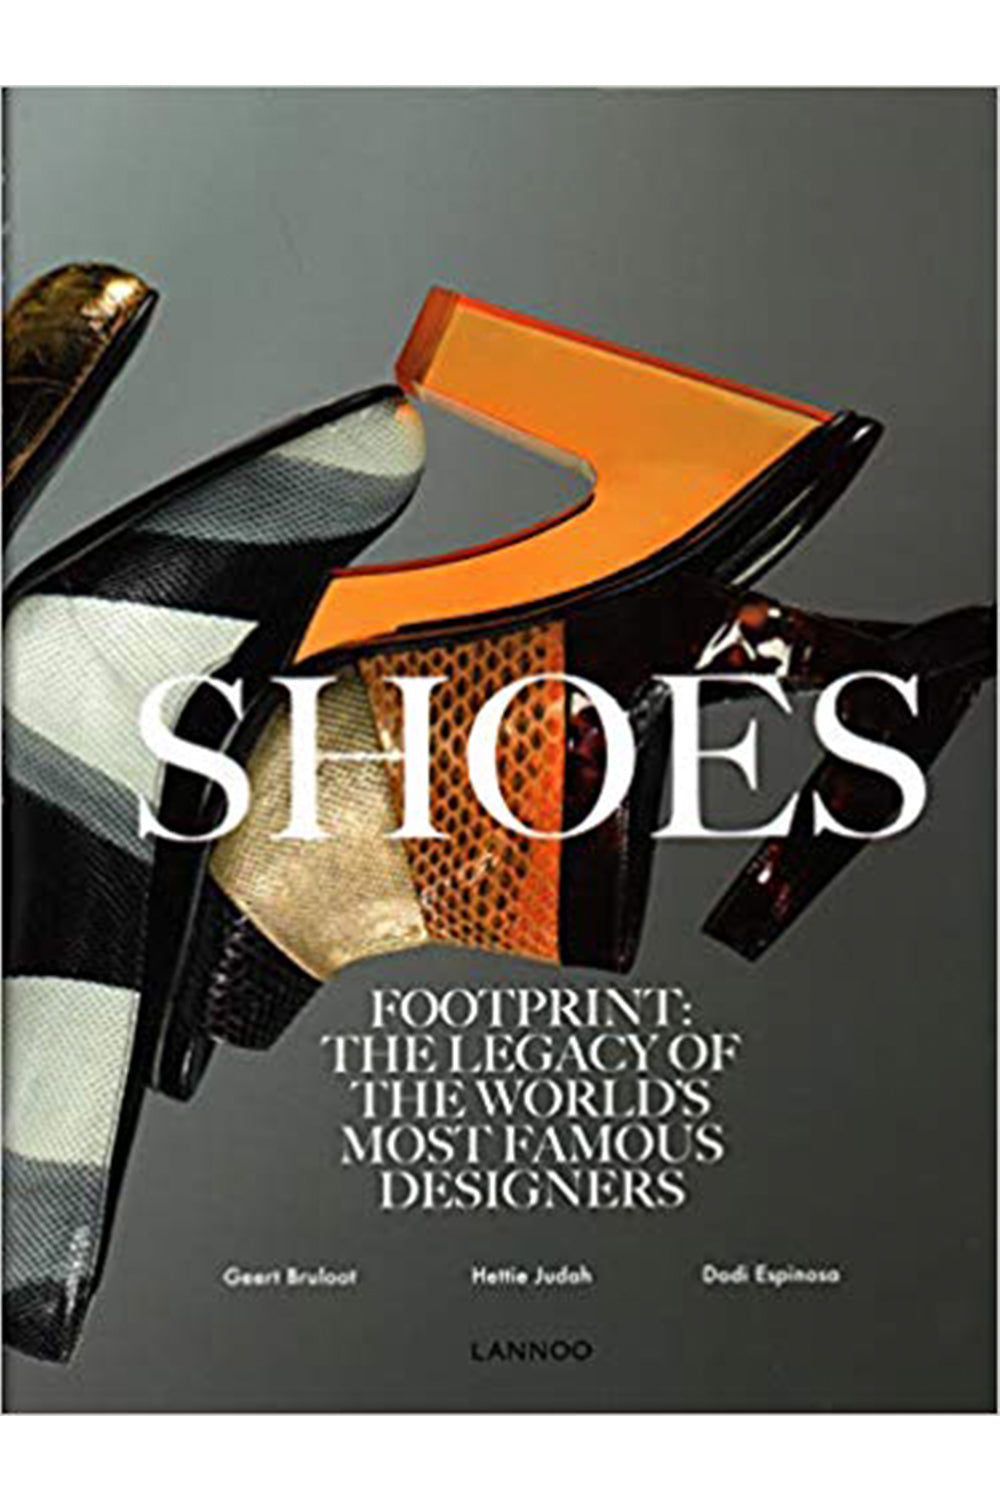 SHOES: FOOTPRINT BOOKS SHOES: FOOTPRINT: THE LEGACY OF THE WORLD'S MOST FAMOUS DESIGNERS